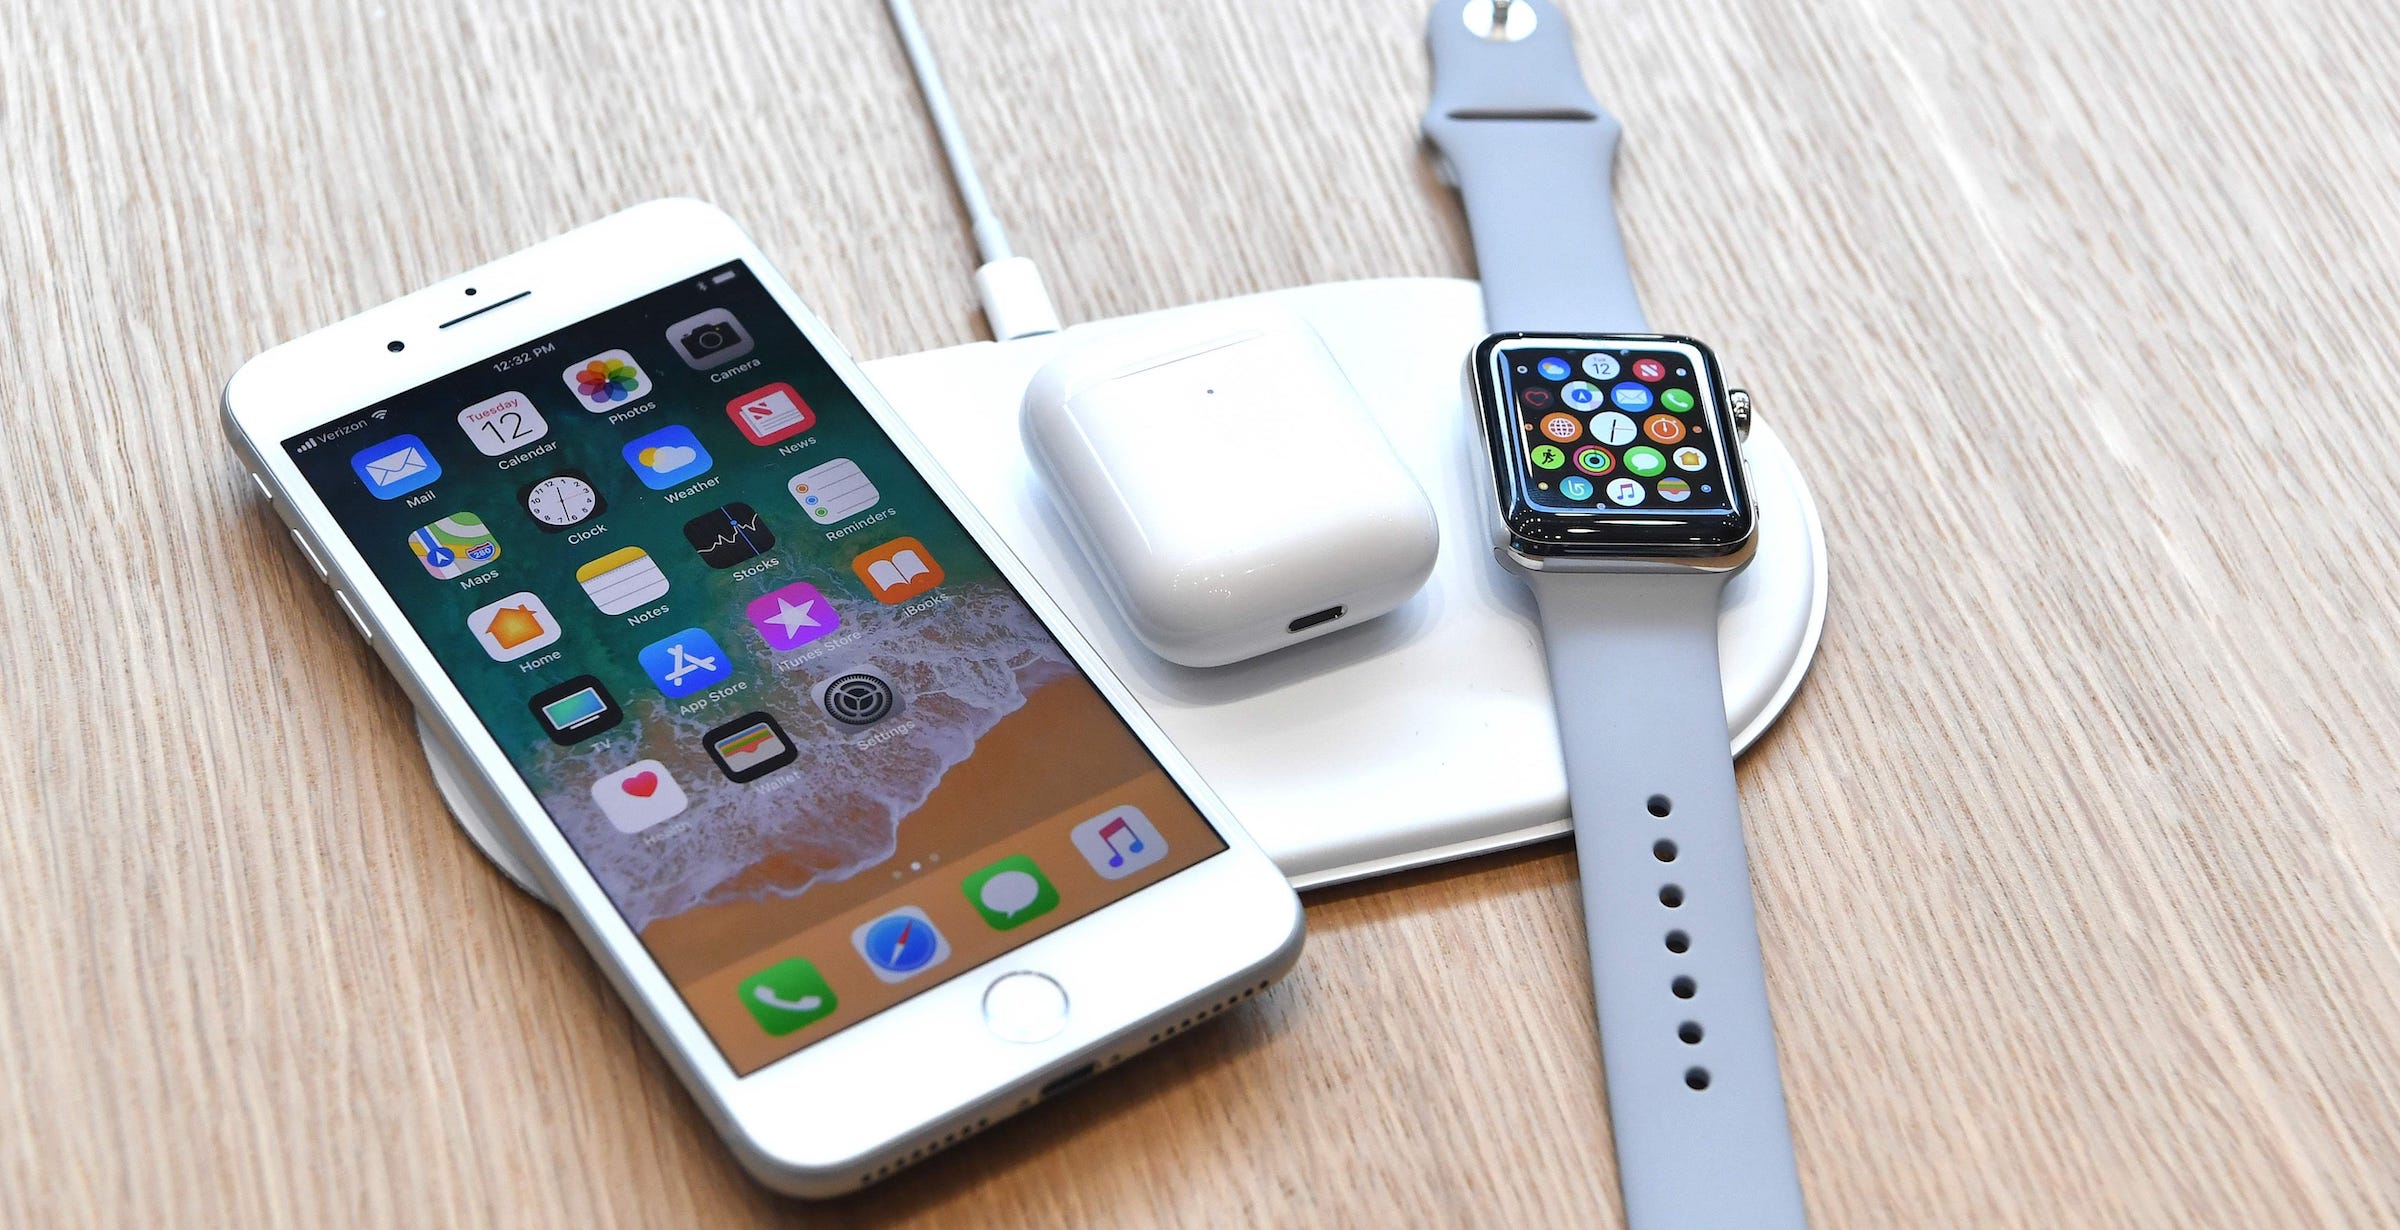 Apple Air Power Could be One More Thing